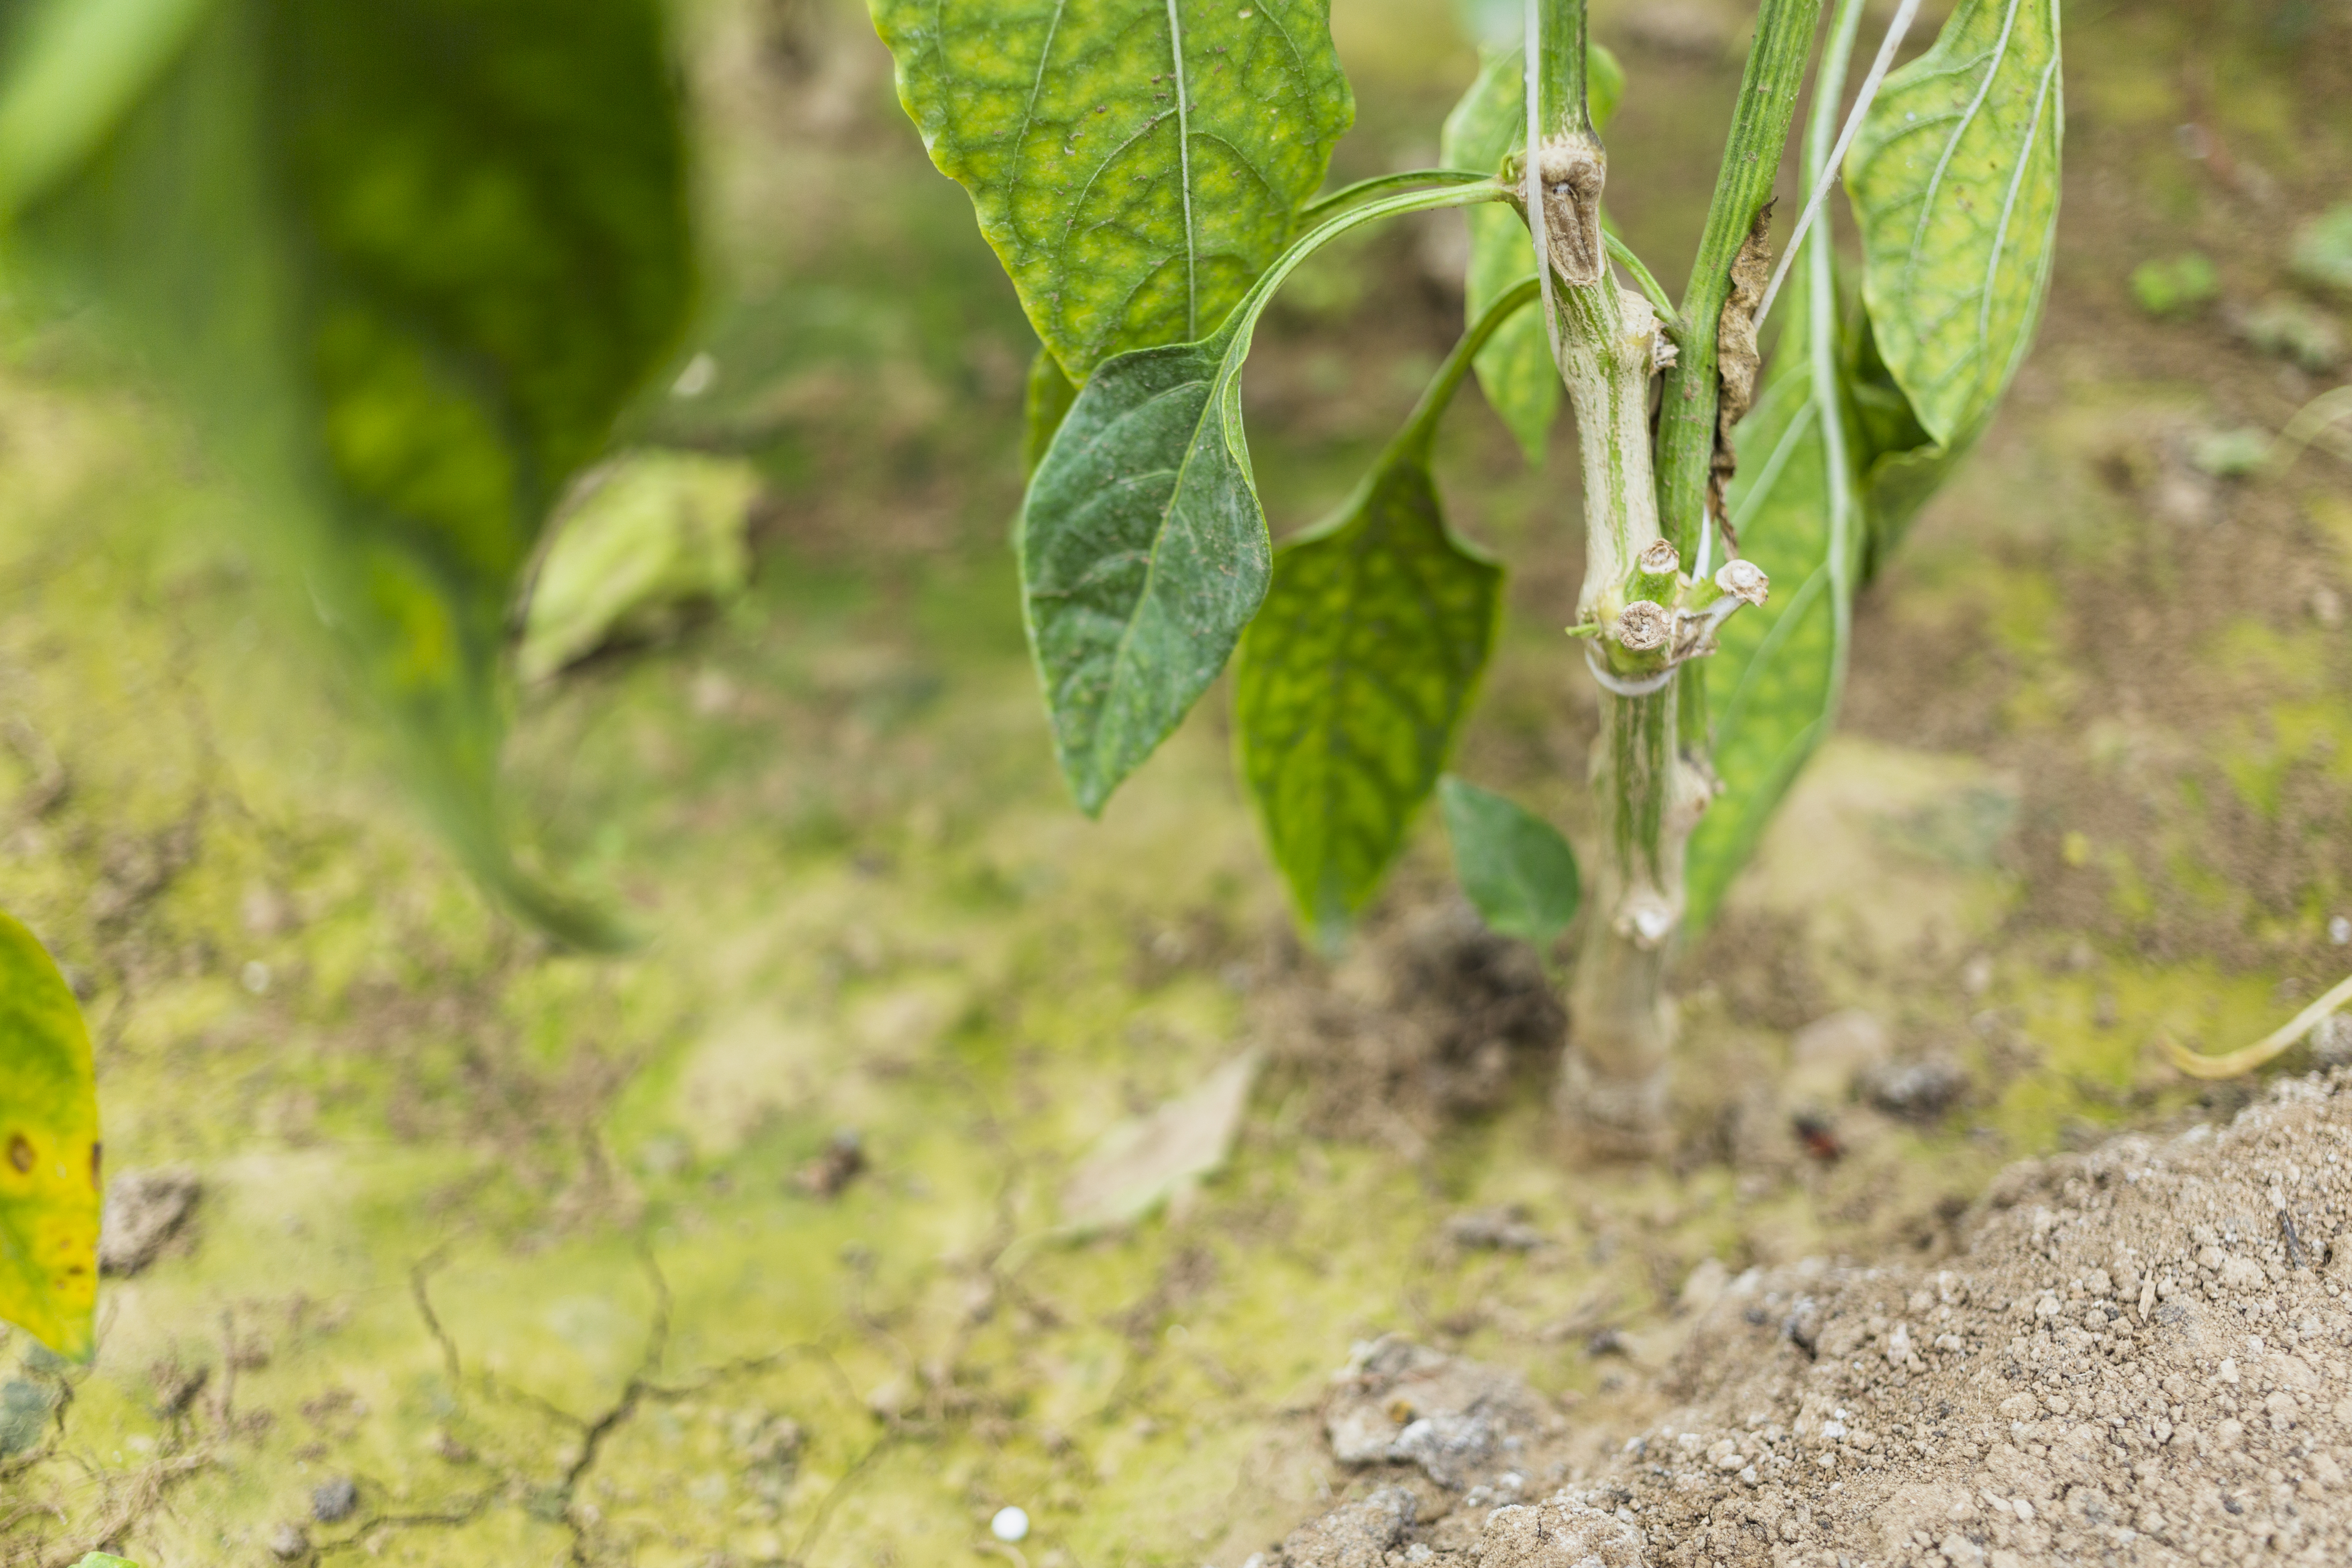 A pepper plant in poor soil with discolored leaves